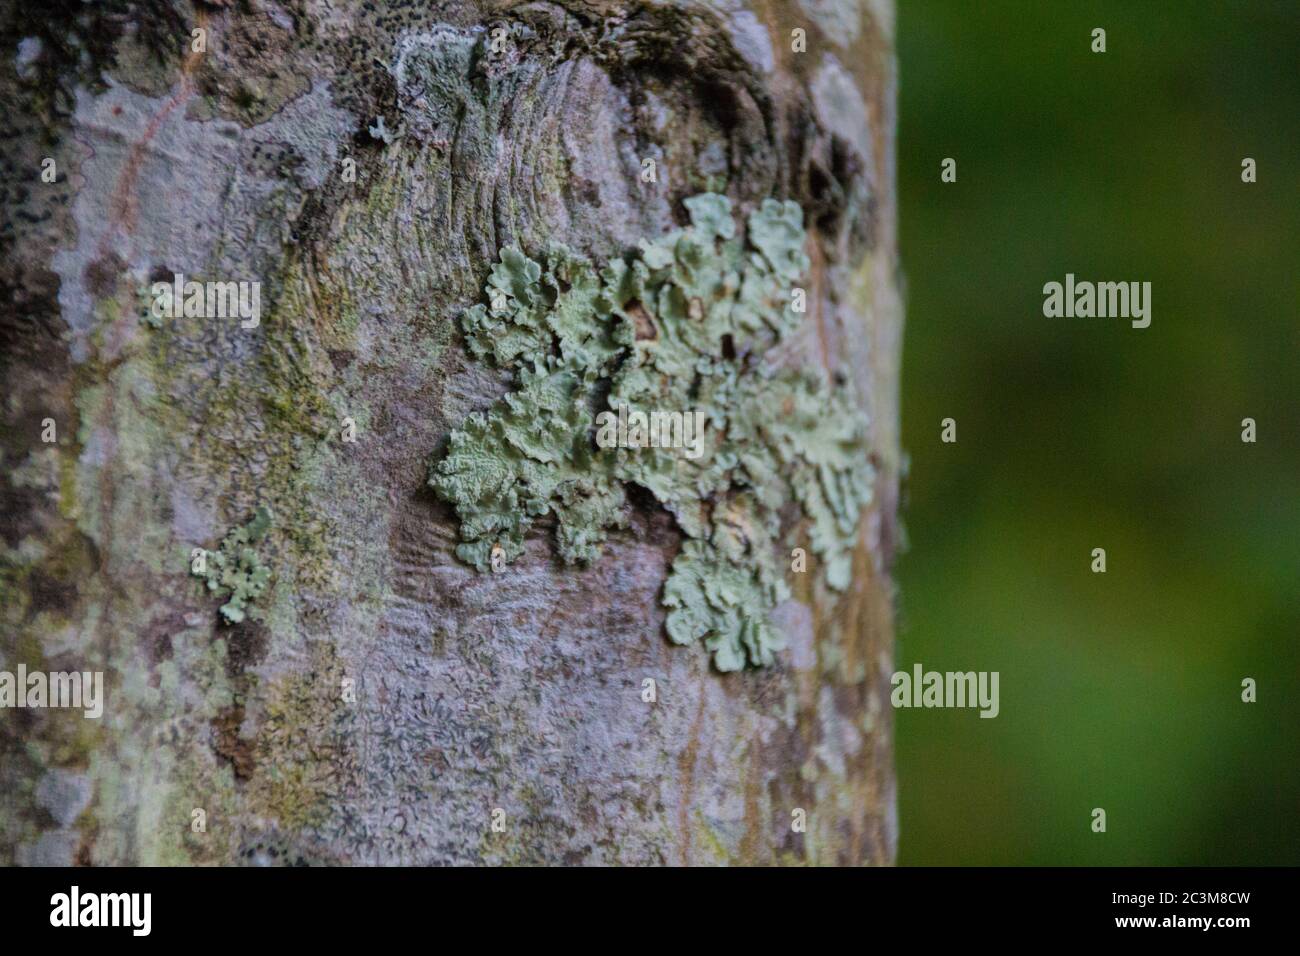 Moss on the tree. Mosses are small flowerless plants that typically grow in dense green clumps or mats, often in damp or shady locations. Stock Photo